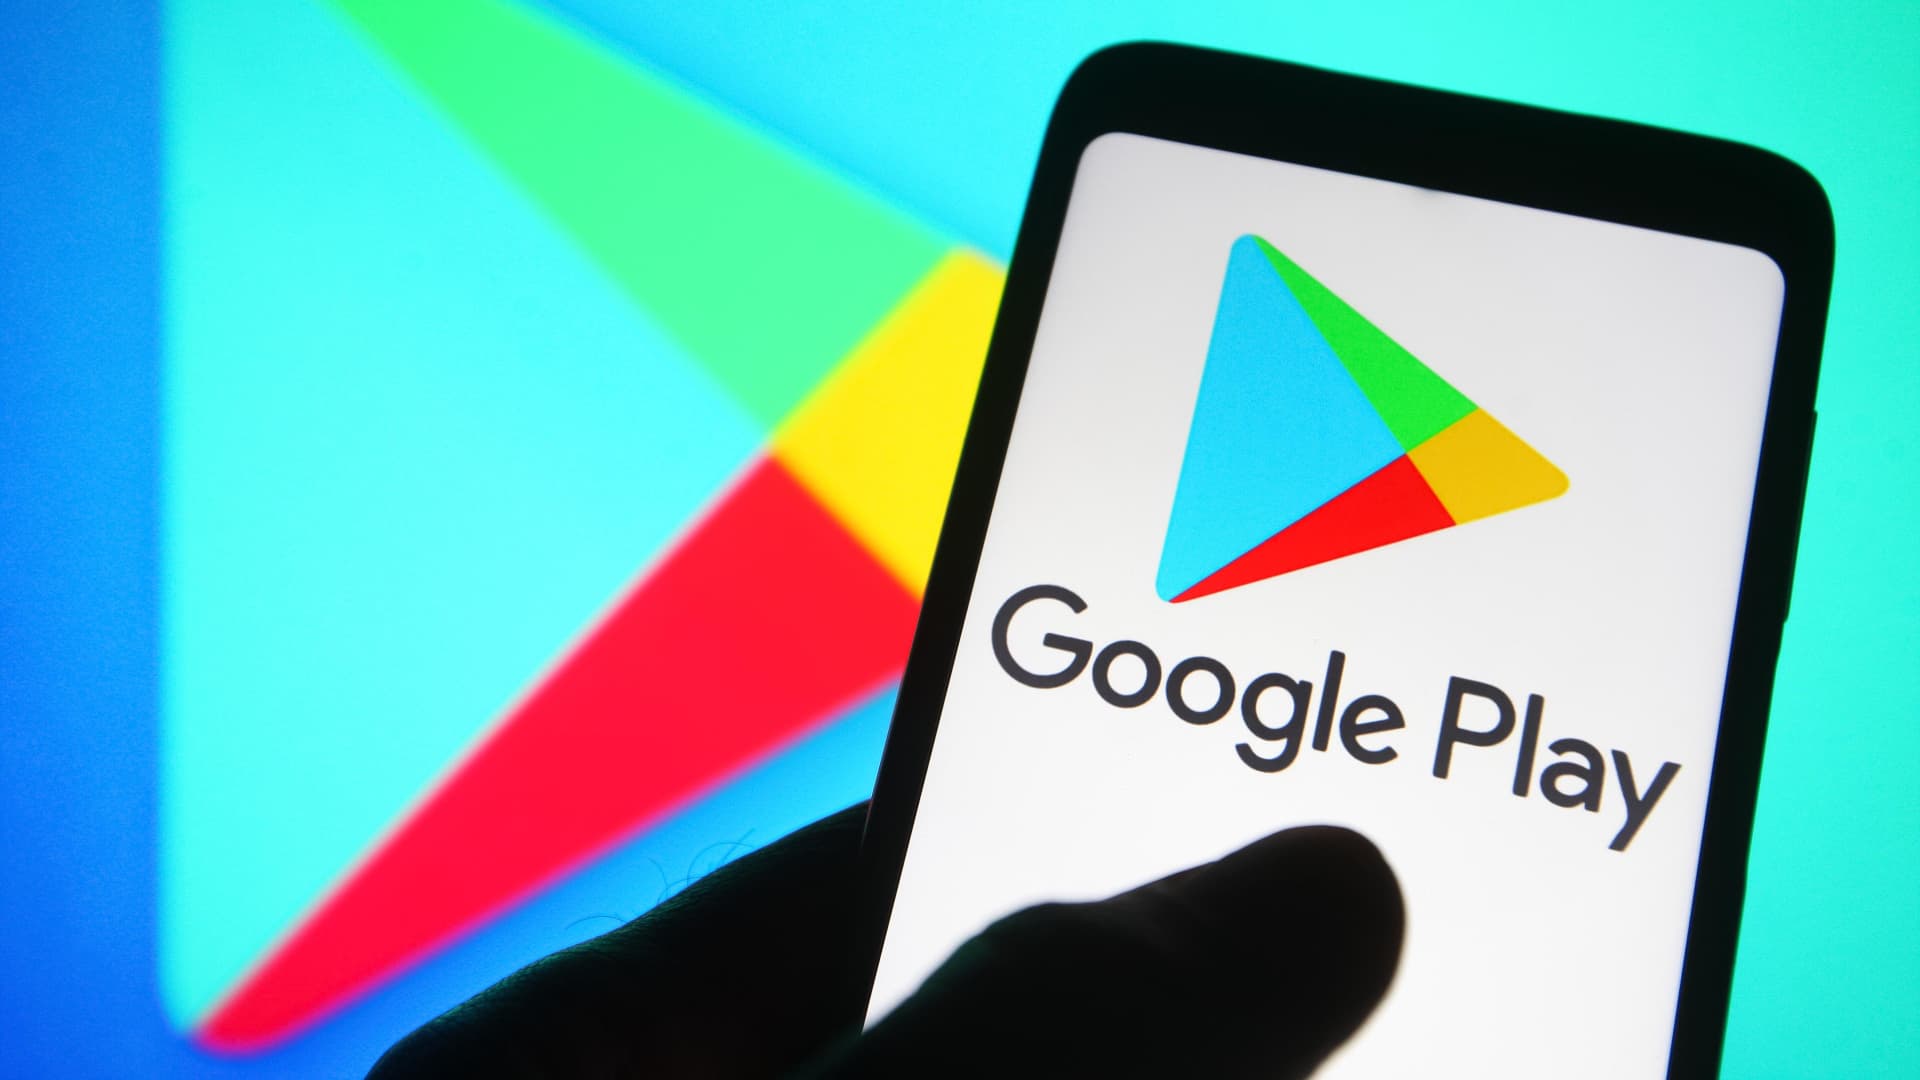 Google to pay 0 million to U.S. consumers, states in Play store settlement